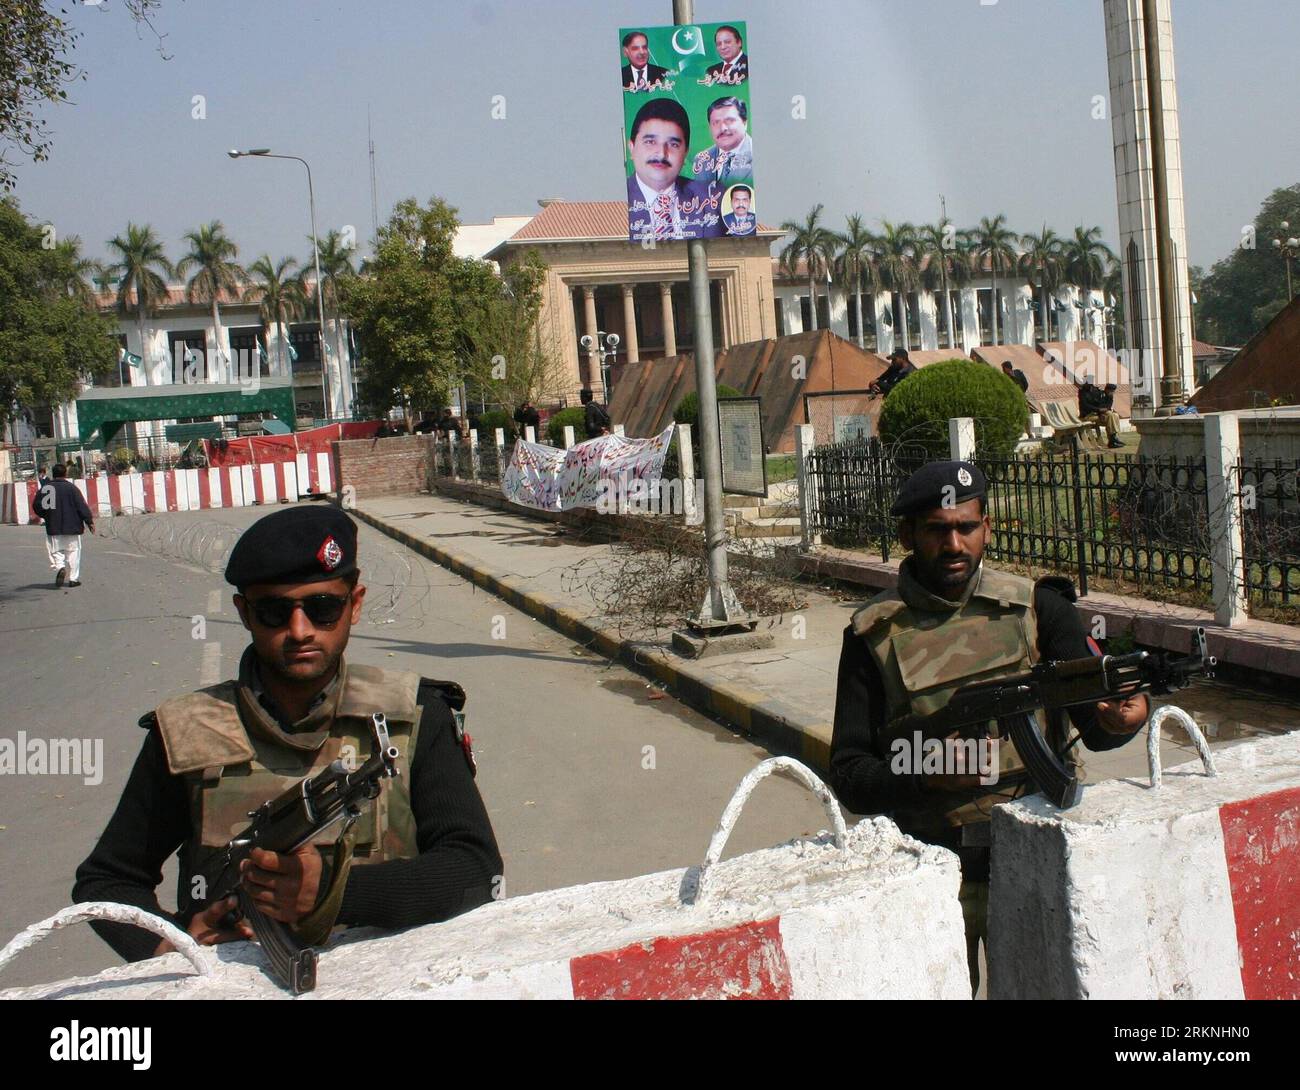 Bildnummer: 57155668  Datum: 02.03.2012  Copyright: imago/Xinhua (120302) -- LAHORE, March 2, 2012 (Xinhua) -- Policemen stand guard outside Punjab Assembly building during senate election in eastern Pakistan s Lahore on March 2, 2012. Voting on vacant Senate seats in Pakistan started on Friday as the ruling Pakistan Peoples Party is set to emerge as the single largest party in the Upper House of the parliament. (Xinhua/Sajjad) (djj) PAKISTAN-LAHORE-SENATE ELECTIONS PUBLICATIONxNOTxINxCHN Pakistan People Politik Wahlen xsp x0x 2012 quer      57155668 Date 02 03 2012 Copyright Imago XINHUA  Lah Stock Photo